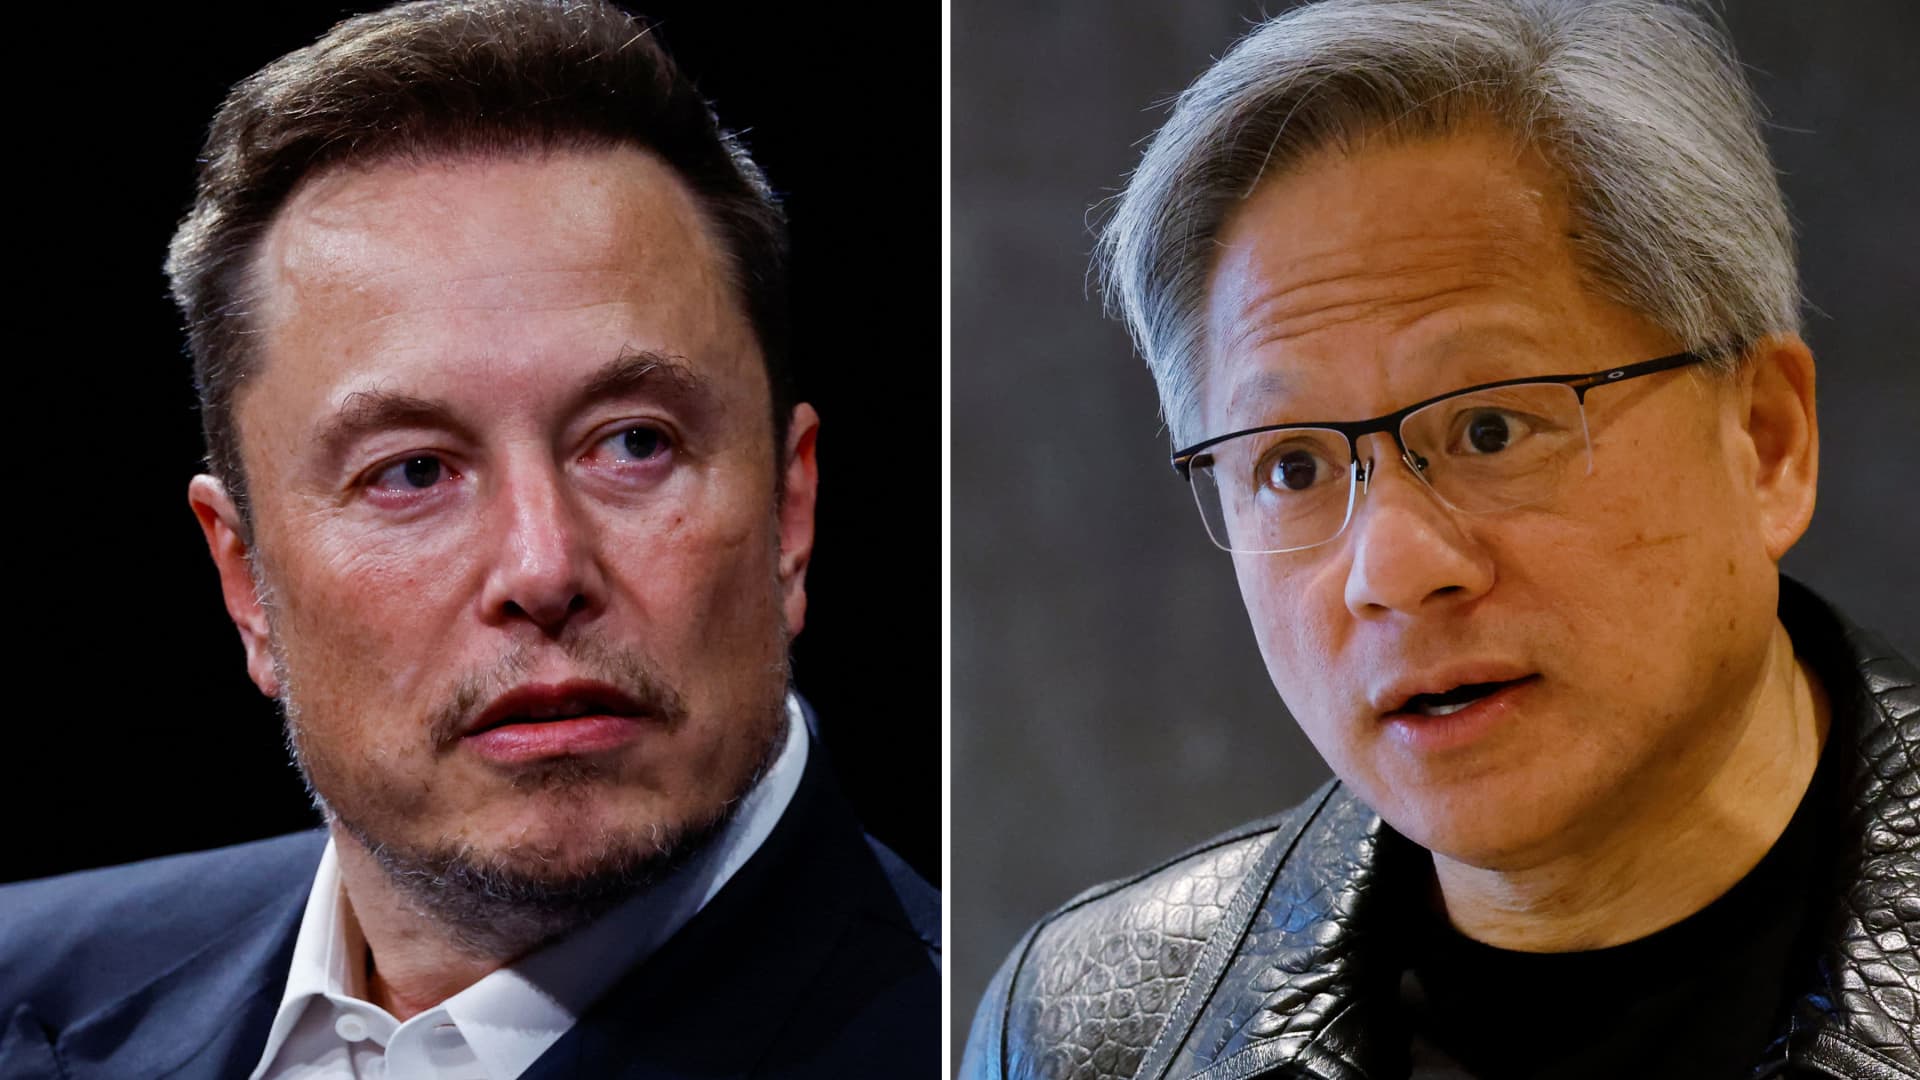 Elon Musk buying Nvidia hardware even as Tesla aims to build AI rival